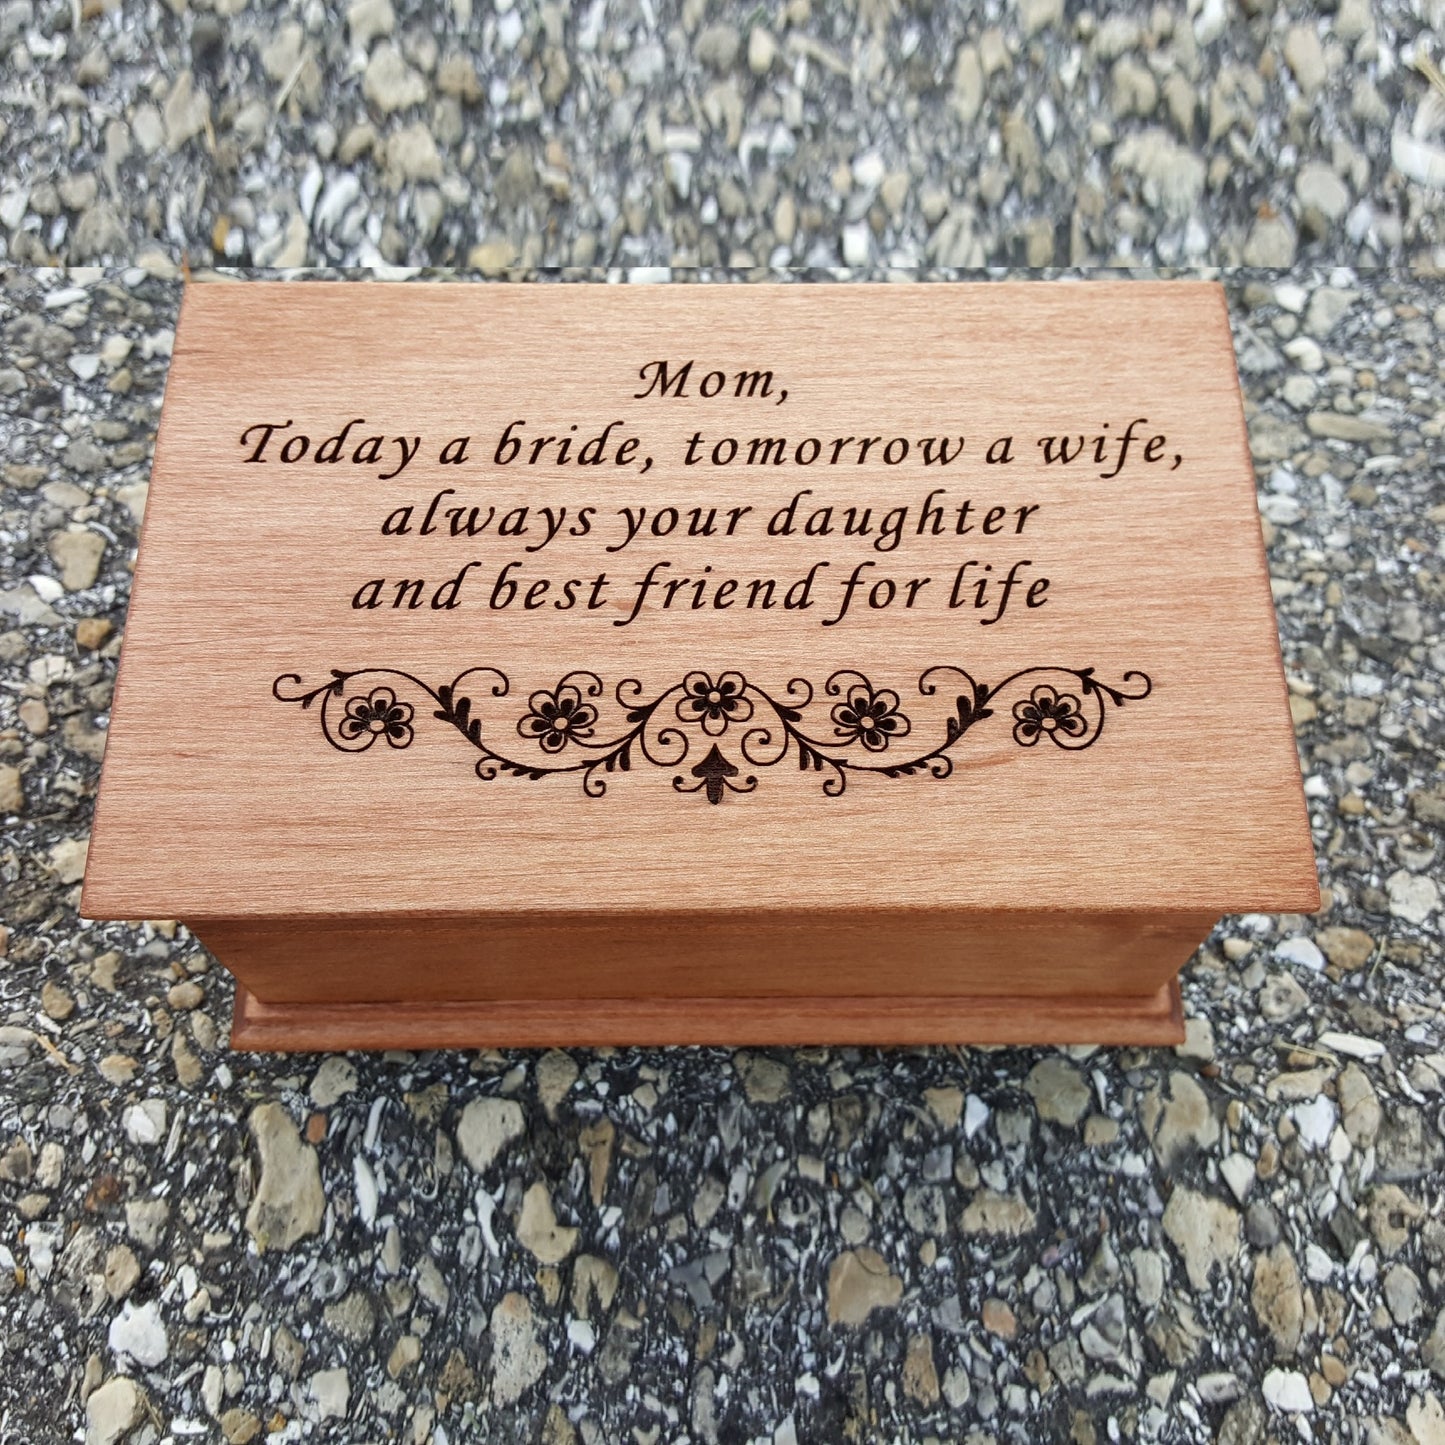 jewelry box with Mom, Today a bride, tomorrow a wife, always your daughter and best friend for life engraved on top. choose color and song, add personalized message to the back